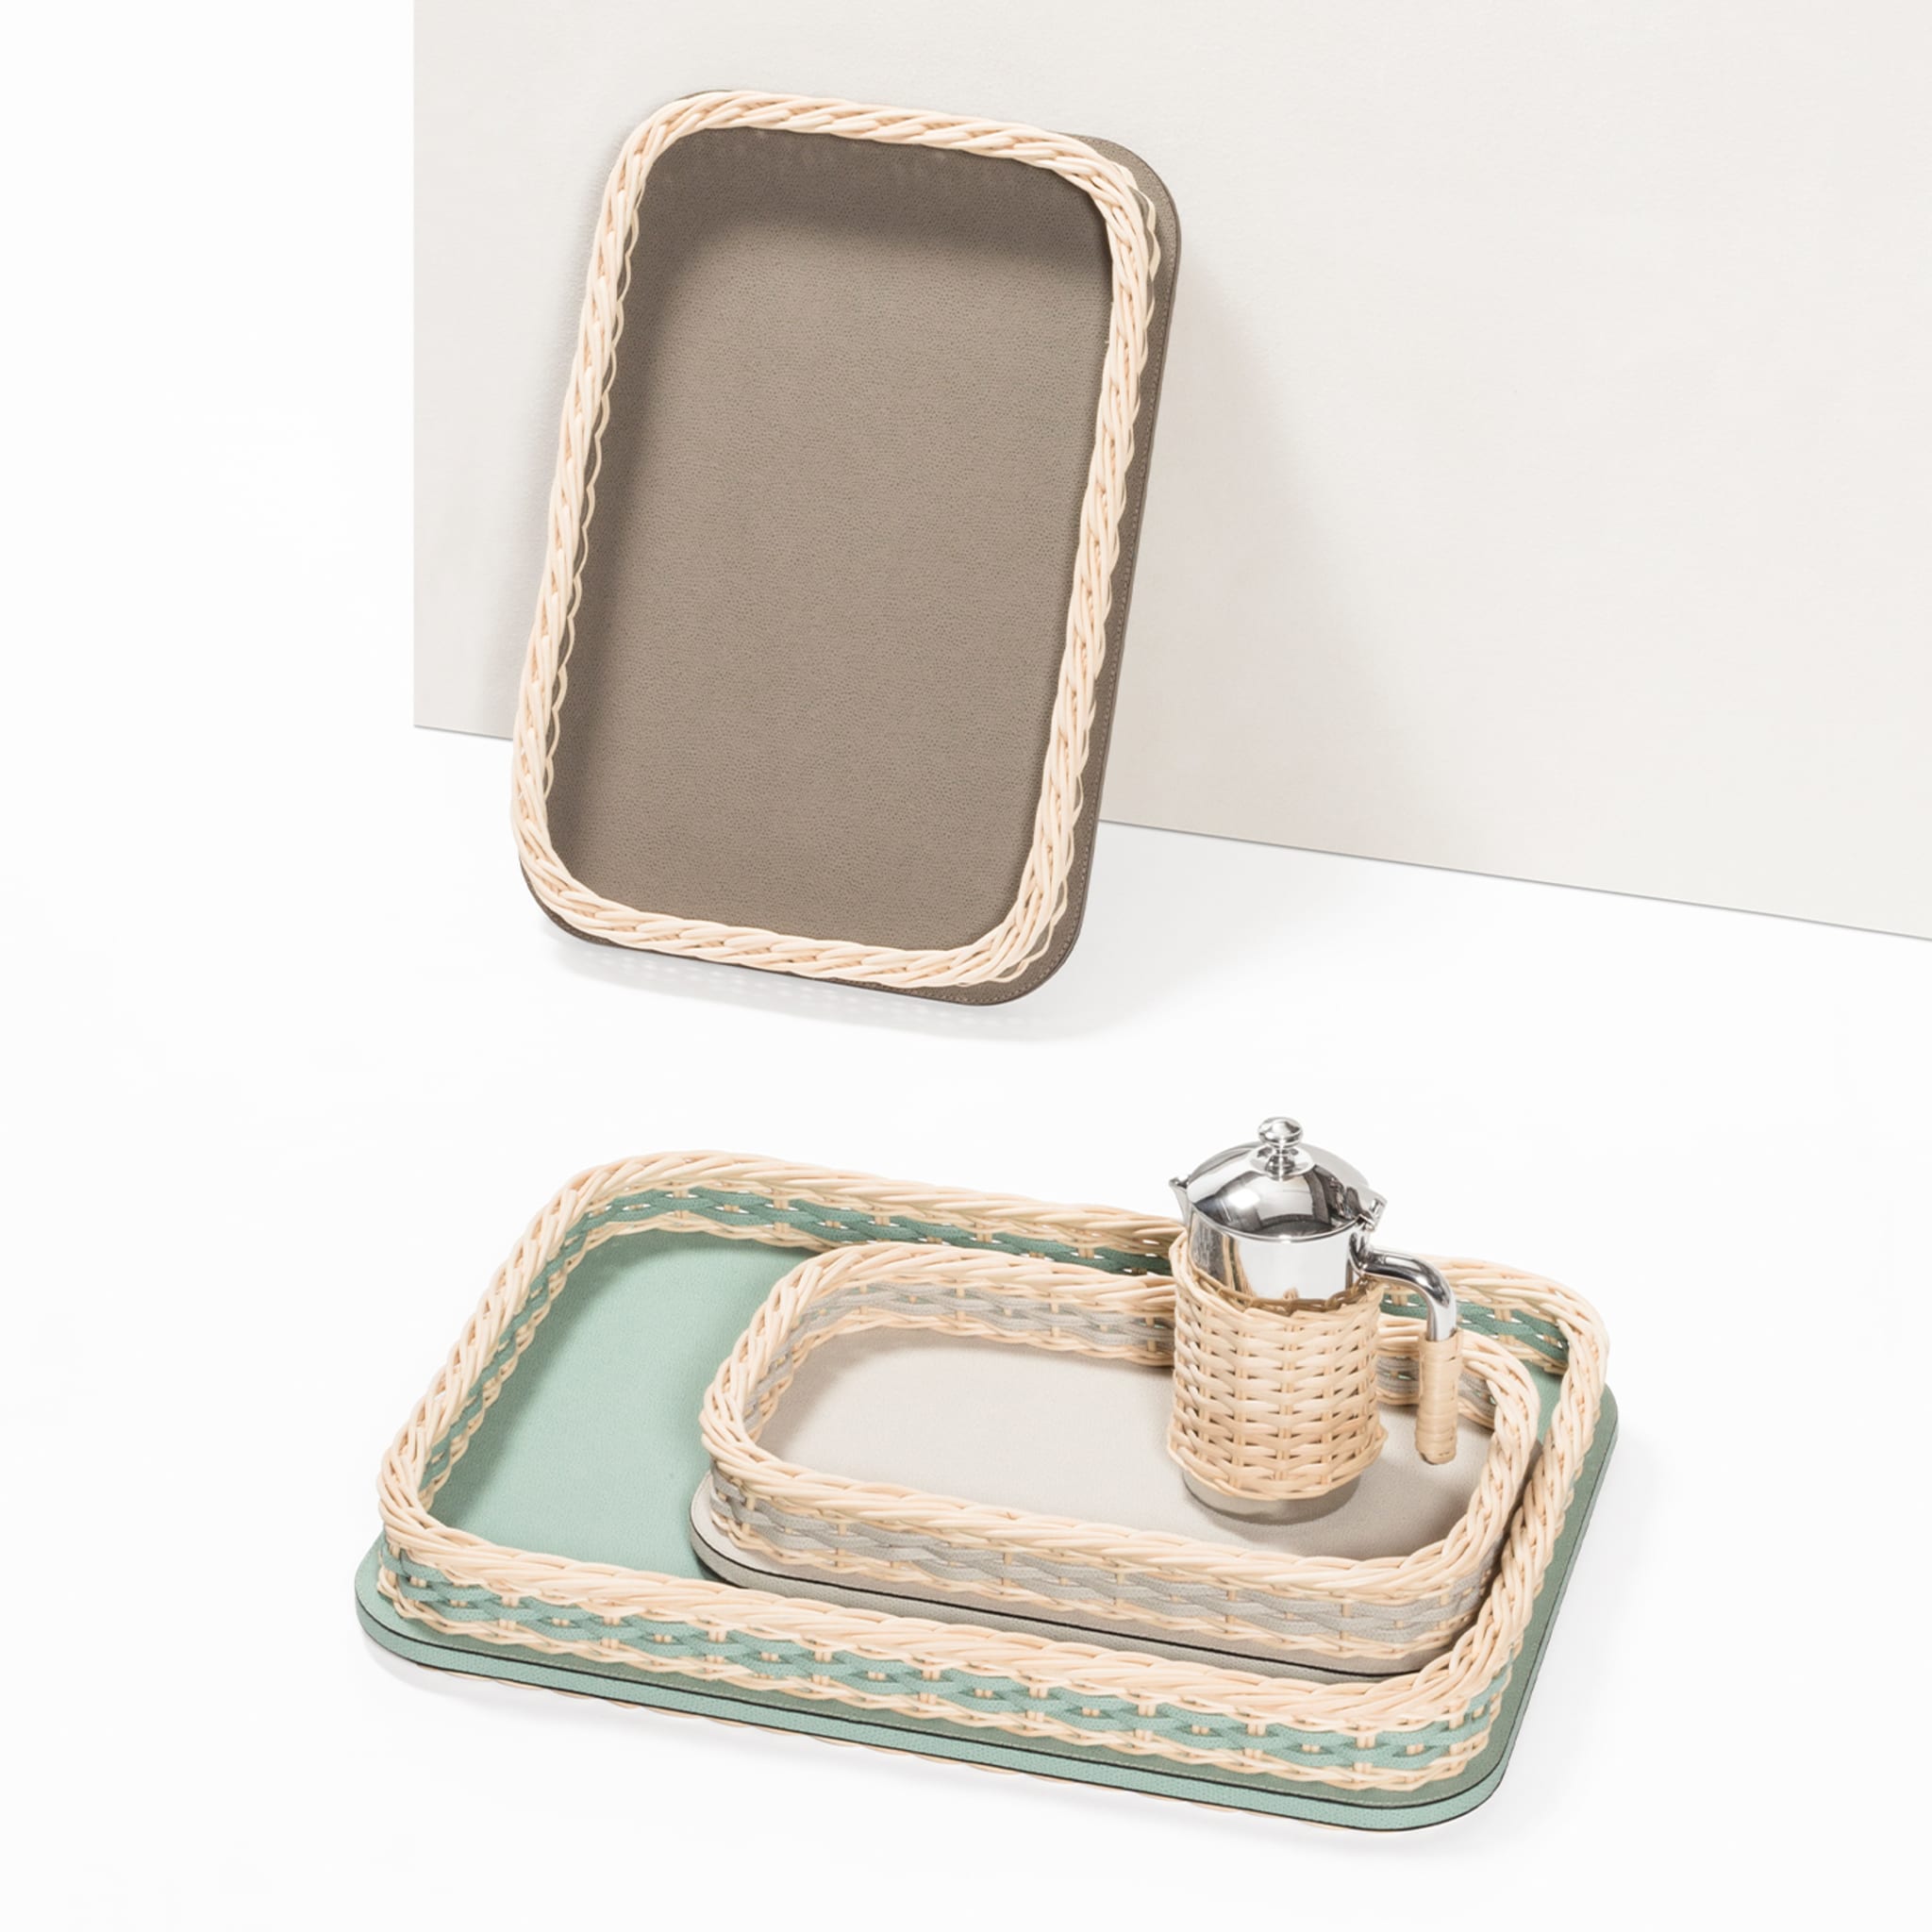 Orsay Beige Leather and Rattan Rectangular Mini Tray - Alternative view 1